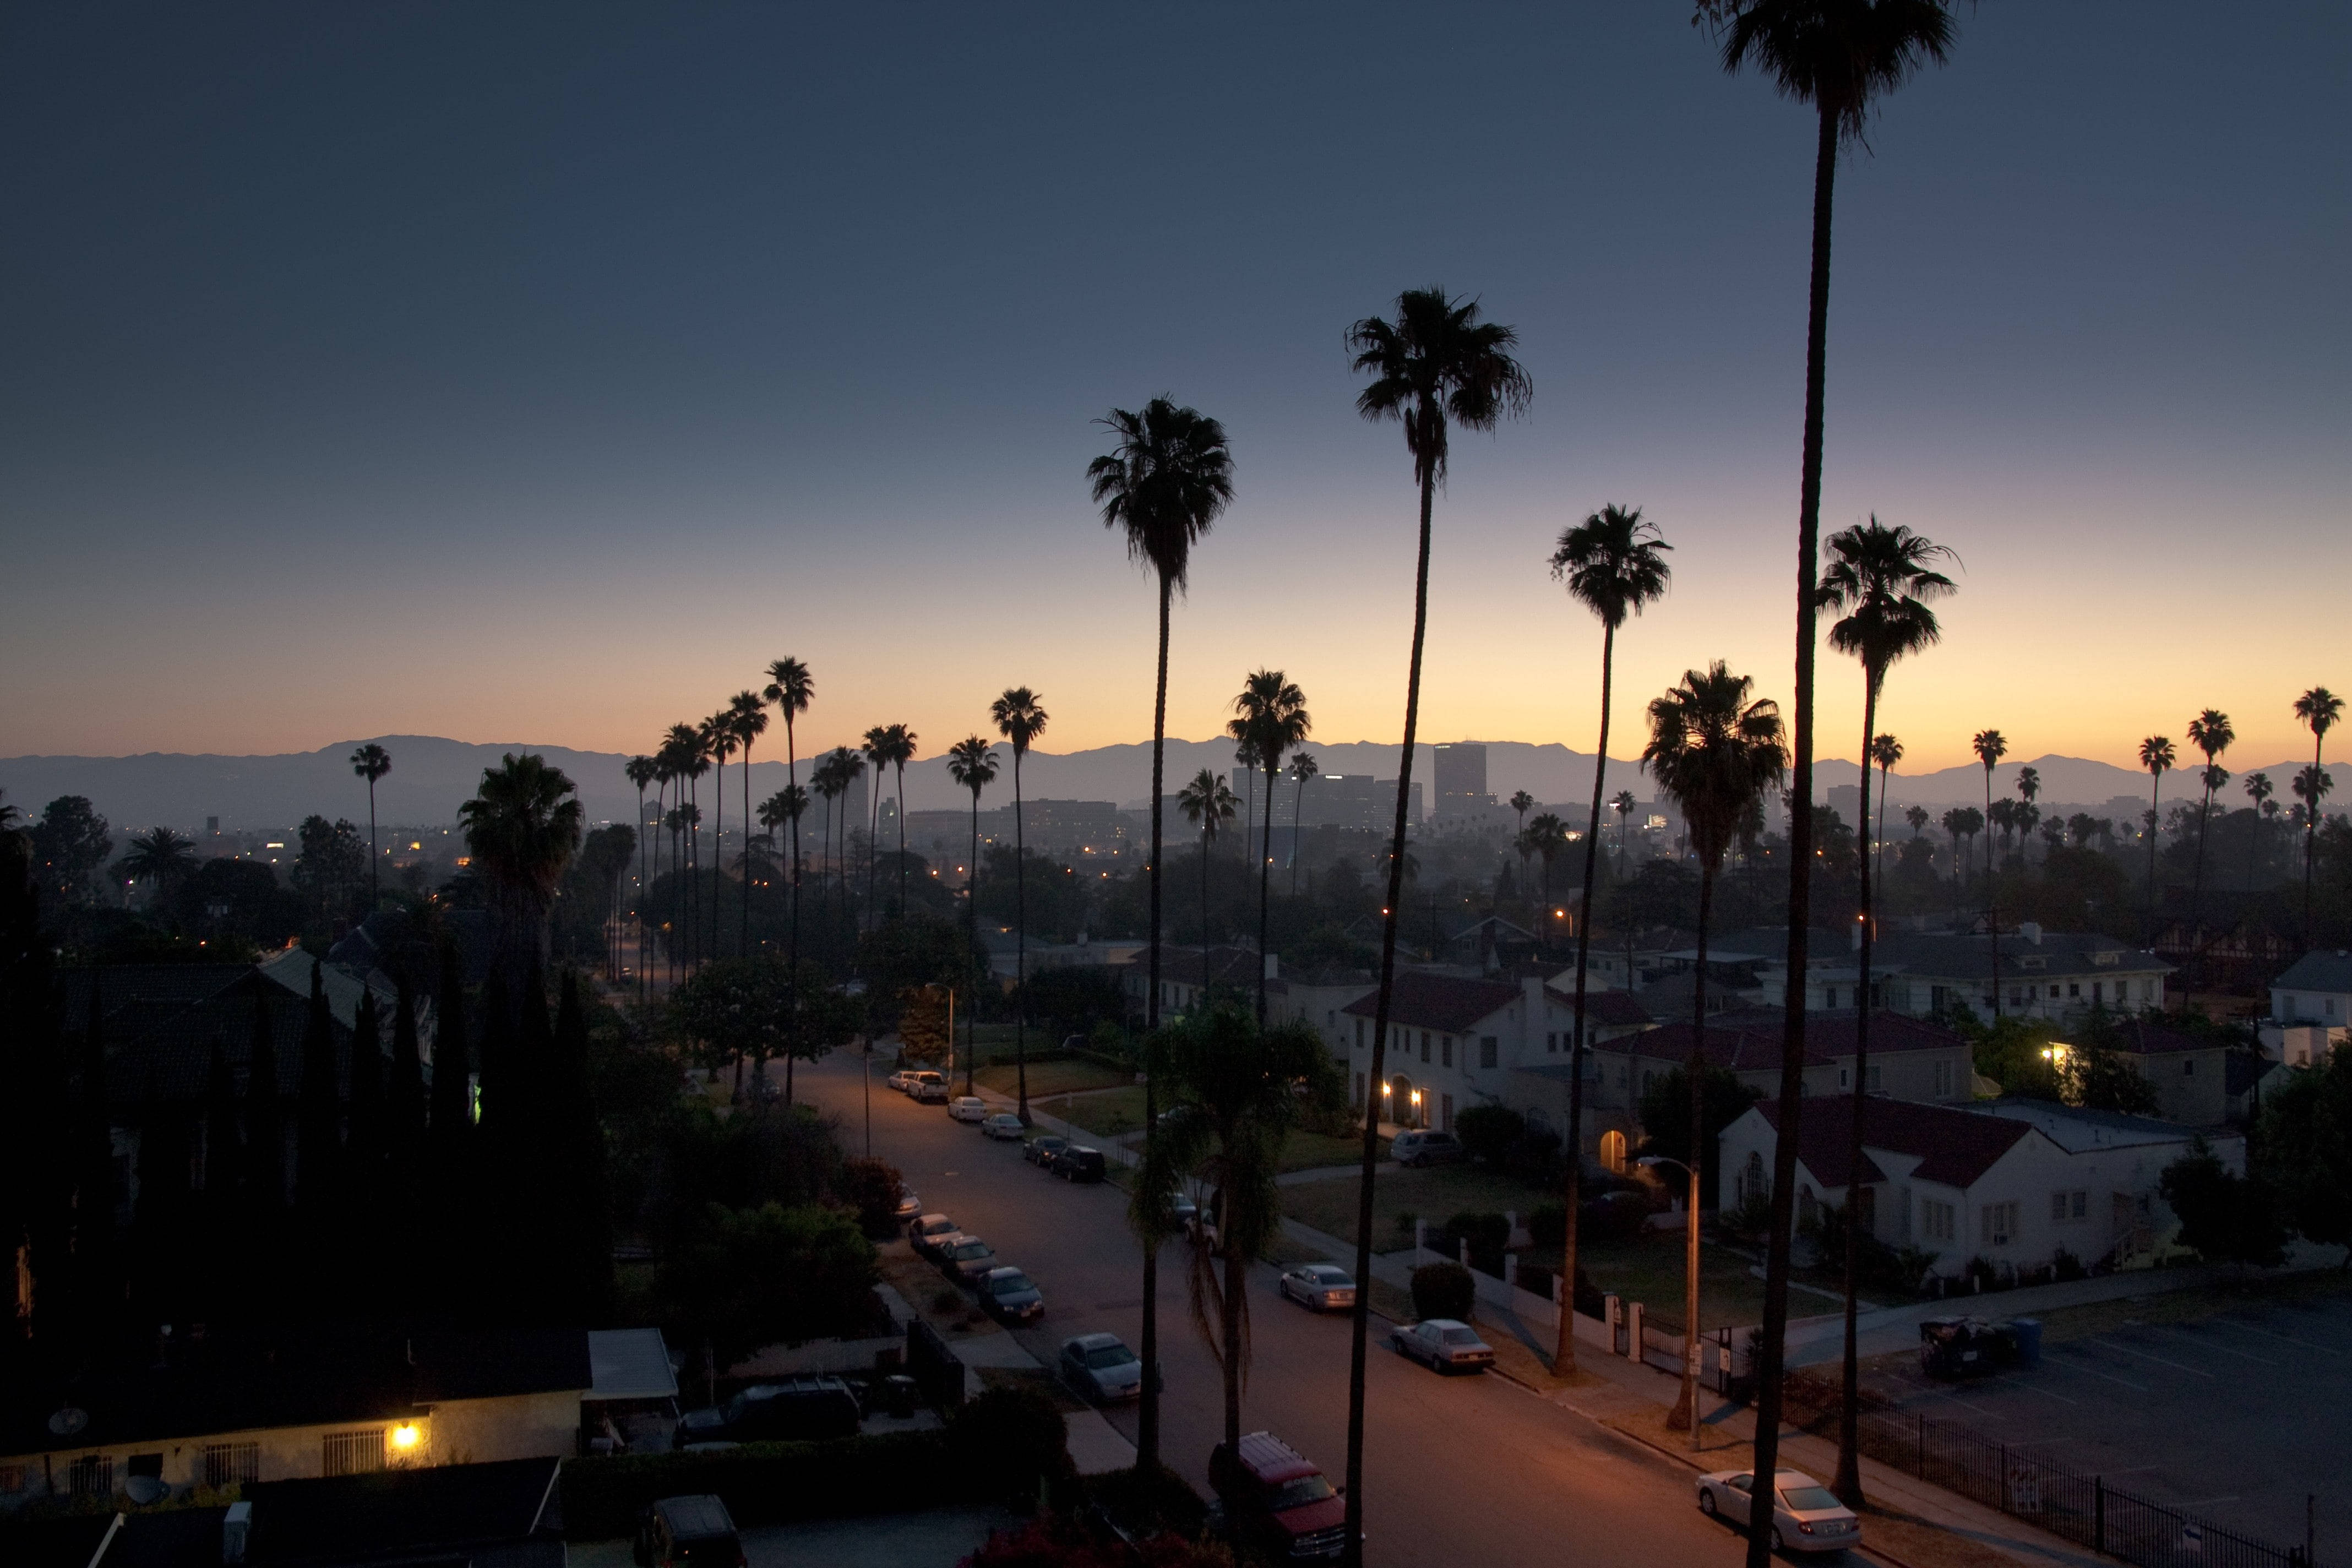 A city street with palm trees and buildings - Los Angeles